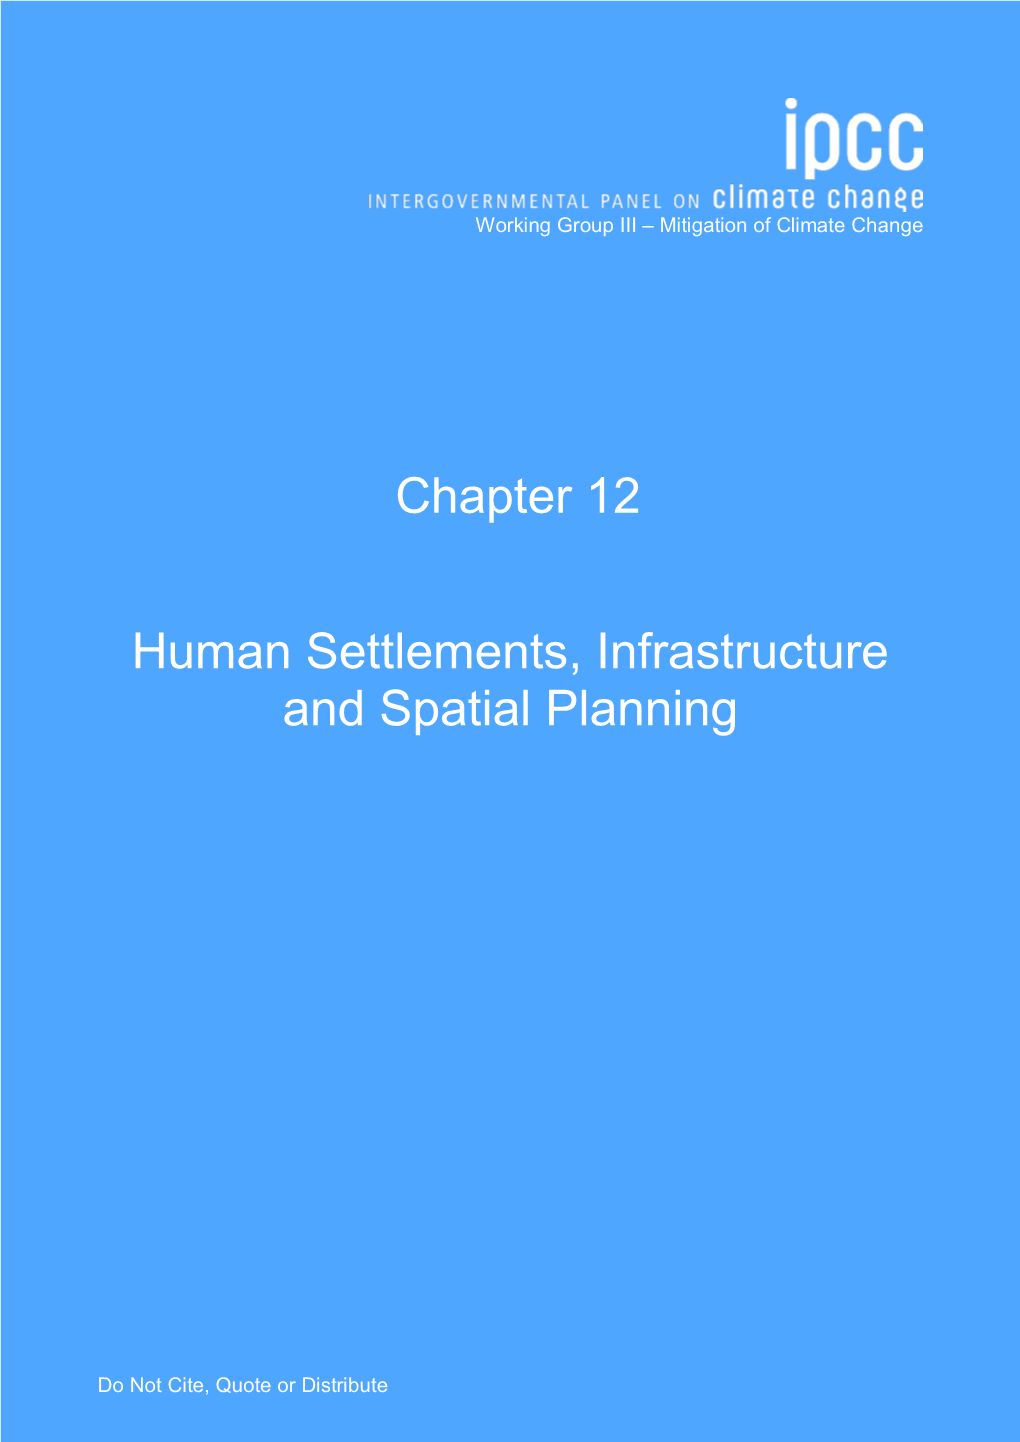 Chapter 12 Human Settlements, Infrastructure and Spatial Planning